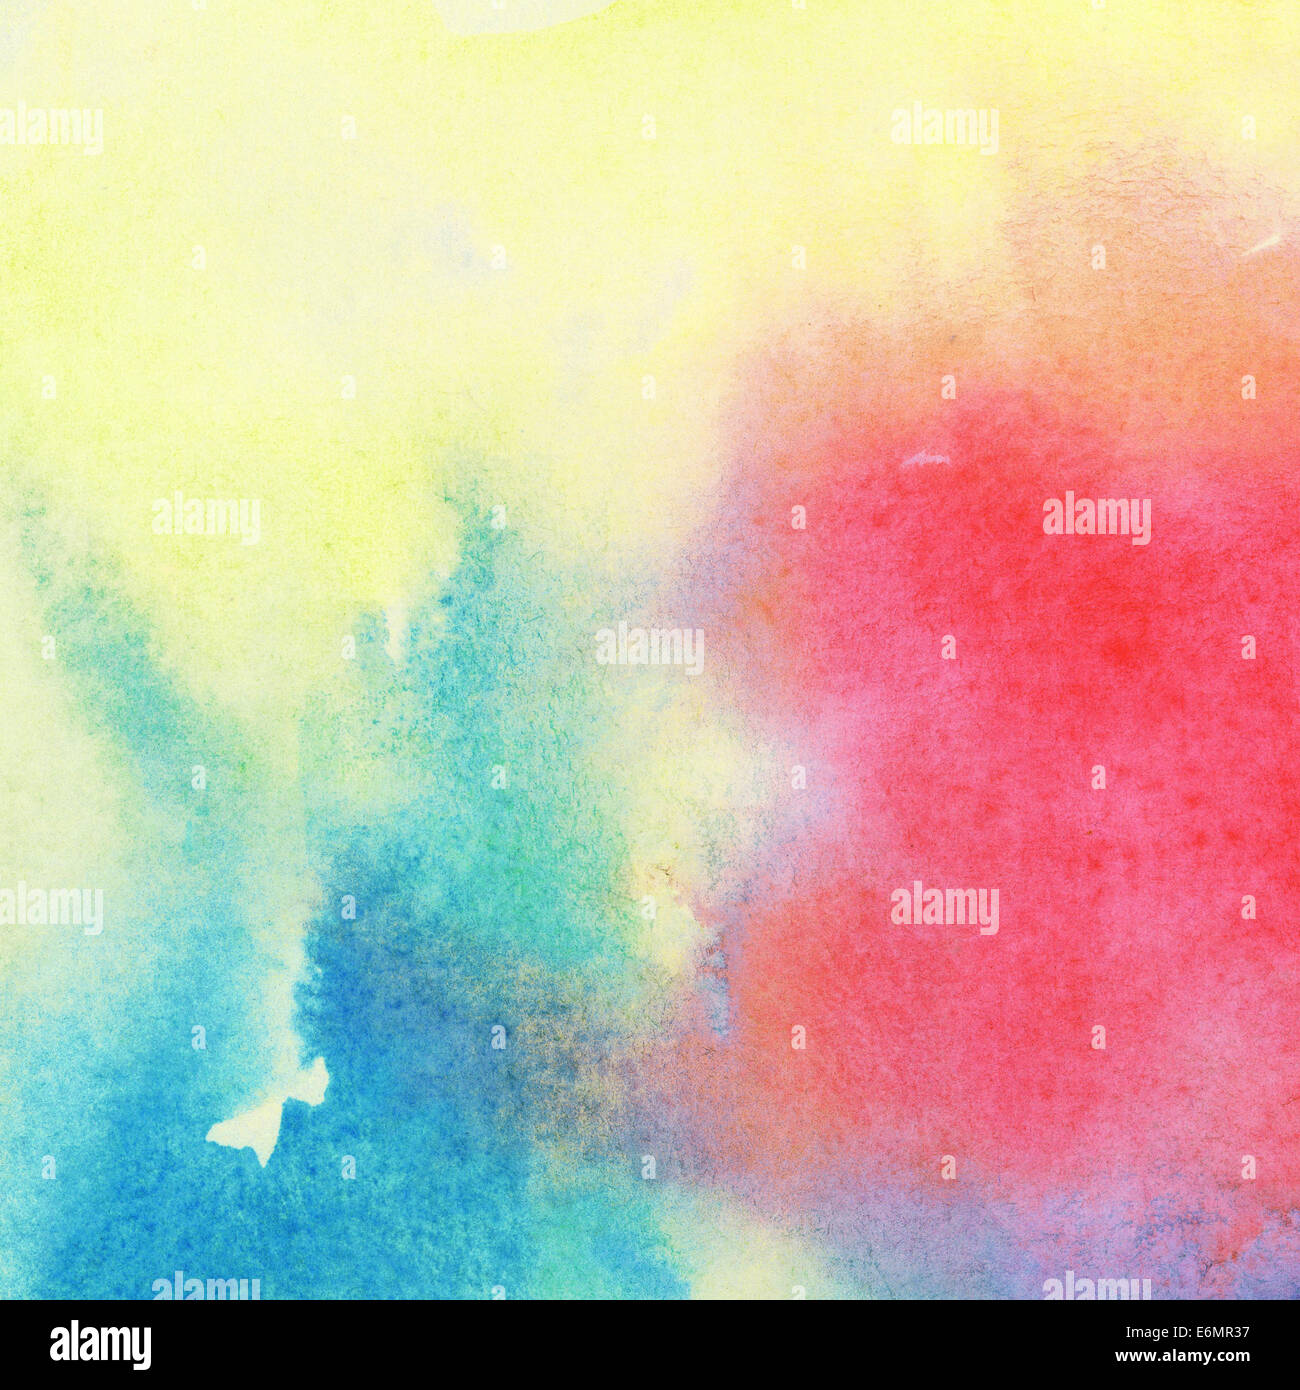 Abstract colorful watercolor background Stock Photo